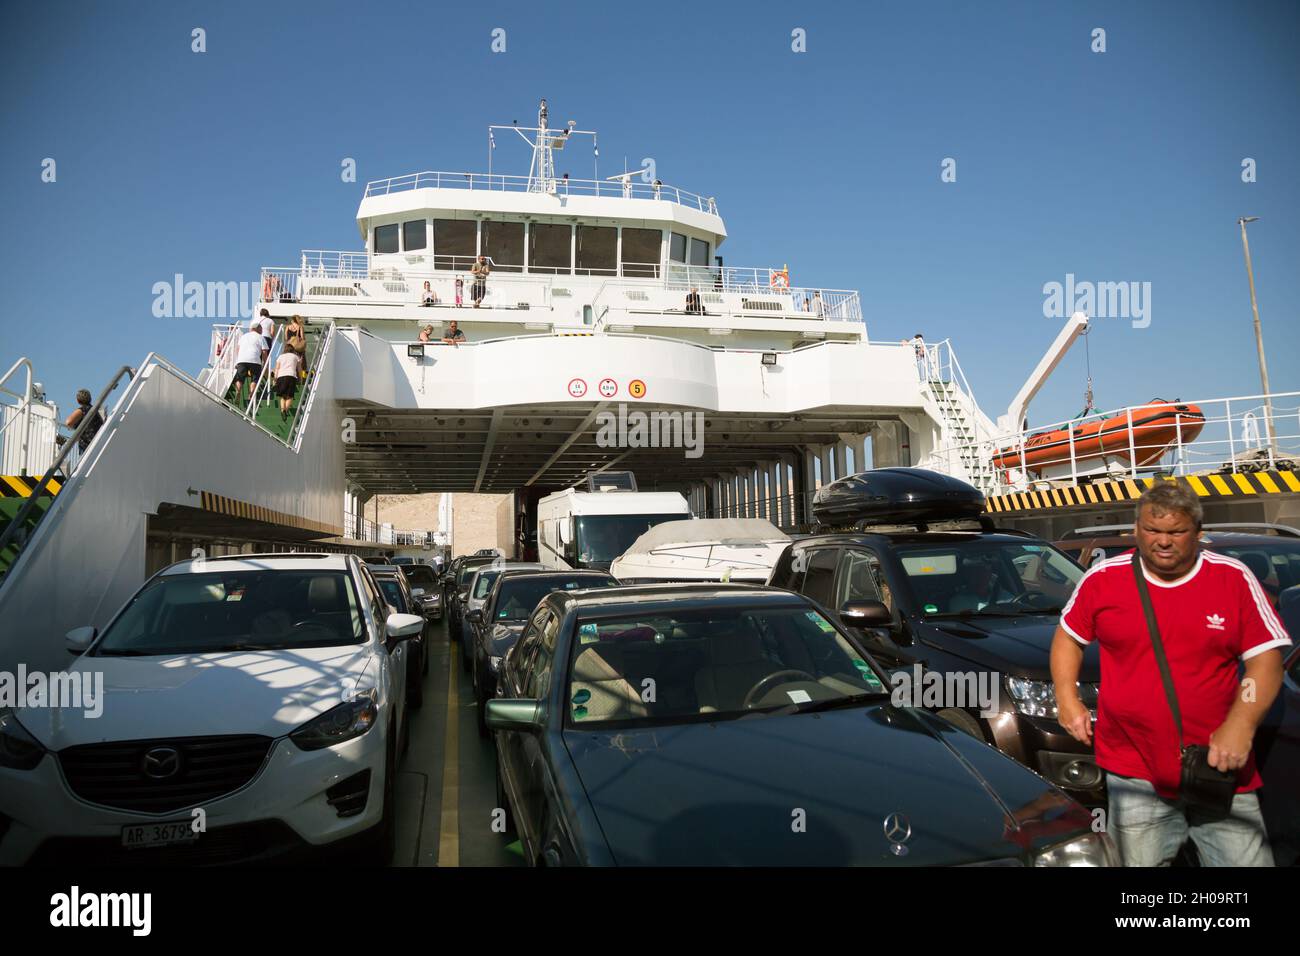 '27.06.2020, Croatia, Primorje-Gorski kotar, Rab - Car ferry from the island of Rab to the mainland. 00A200627D030CAROEX.JPG [MODEL RELEASE: NO, PROPE Stock Photo